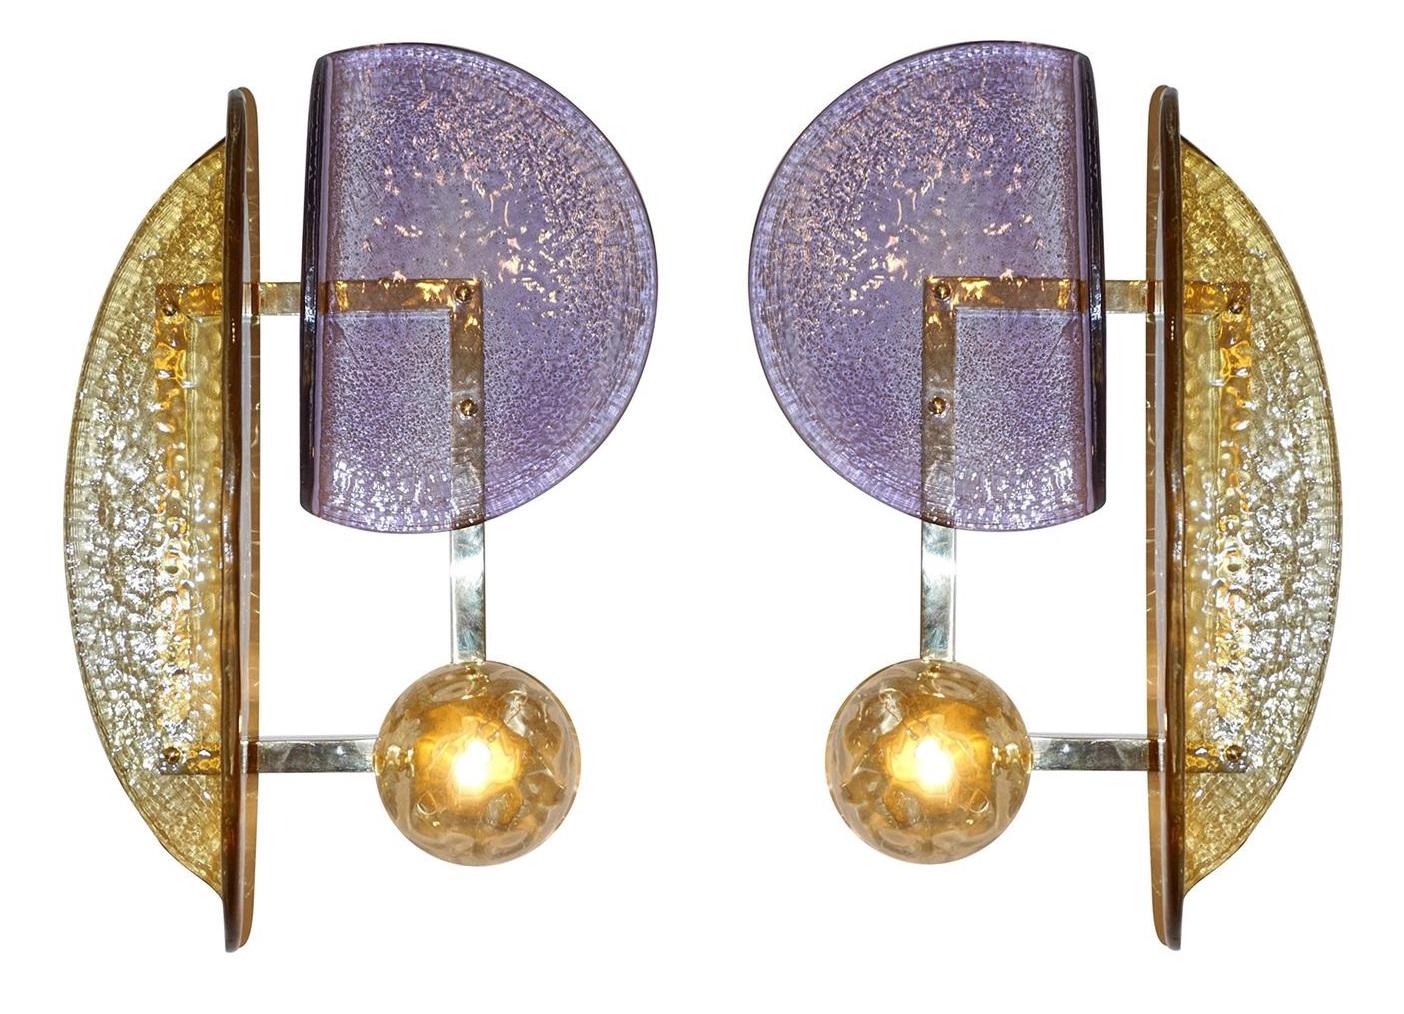 One of a kind pair of geometric wall lights, each wall light is composed of three Murano glass elements in purple, dark amber, and light amber globe, mounted on a rectangular brass frame / Made in Italy
Measures: Height 21 inches, width 14 inches,